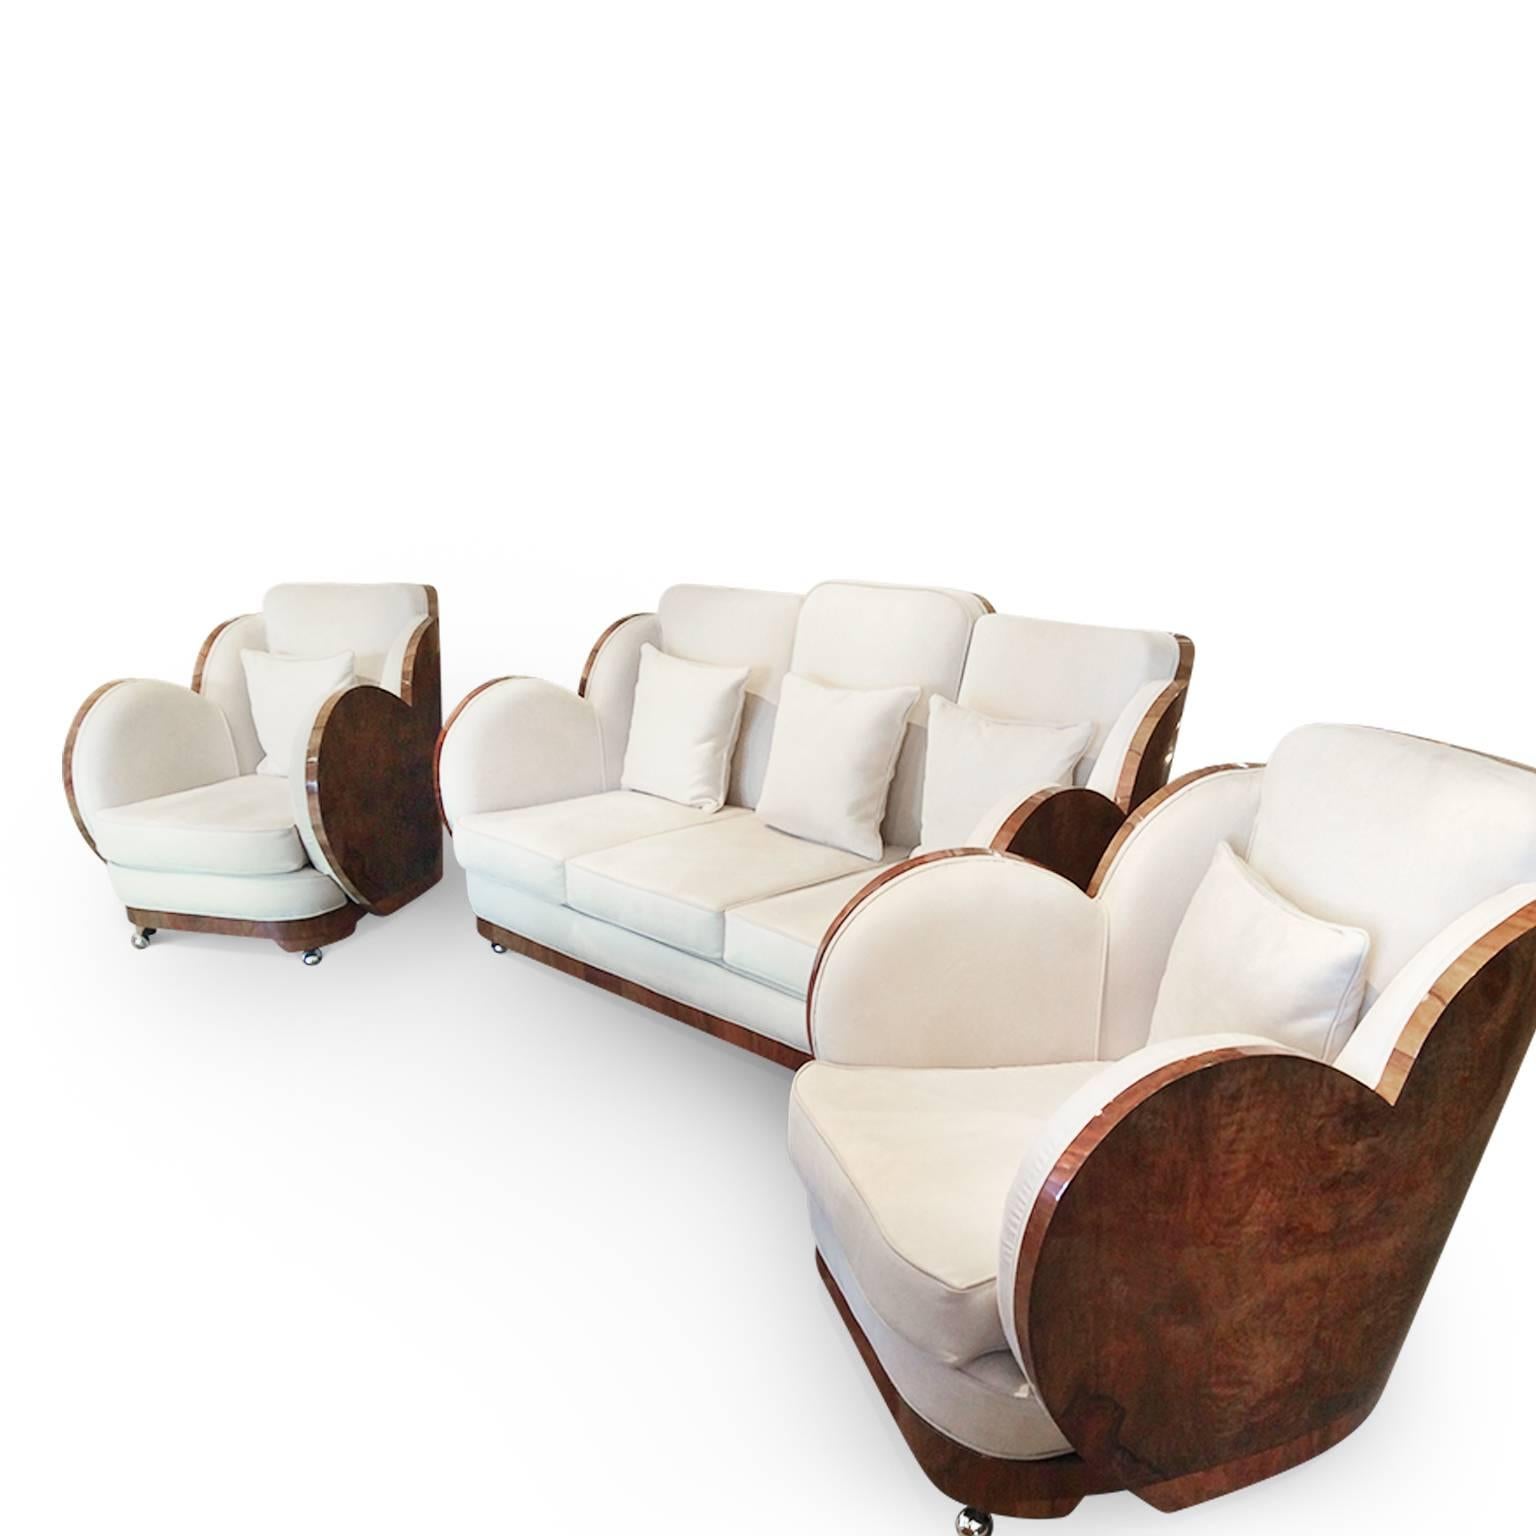 The iconic Art Deco cloud lounge suite by the Epstein brothers. Figured walnut veneers that wraparound the entire suite, newly polished and in excellent condition. Fully reupholstered in washable Faux Suede. Circa 1930s. Dimensions of the chairs: H: